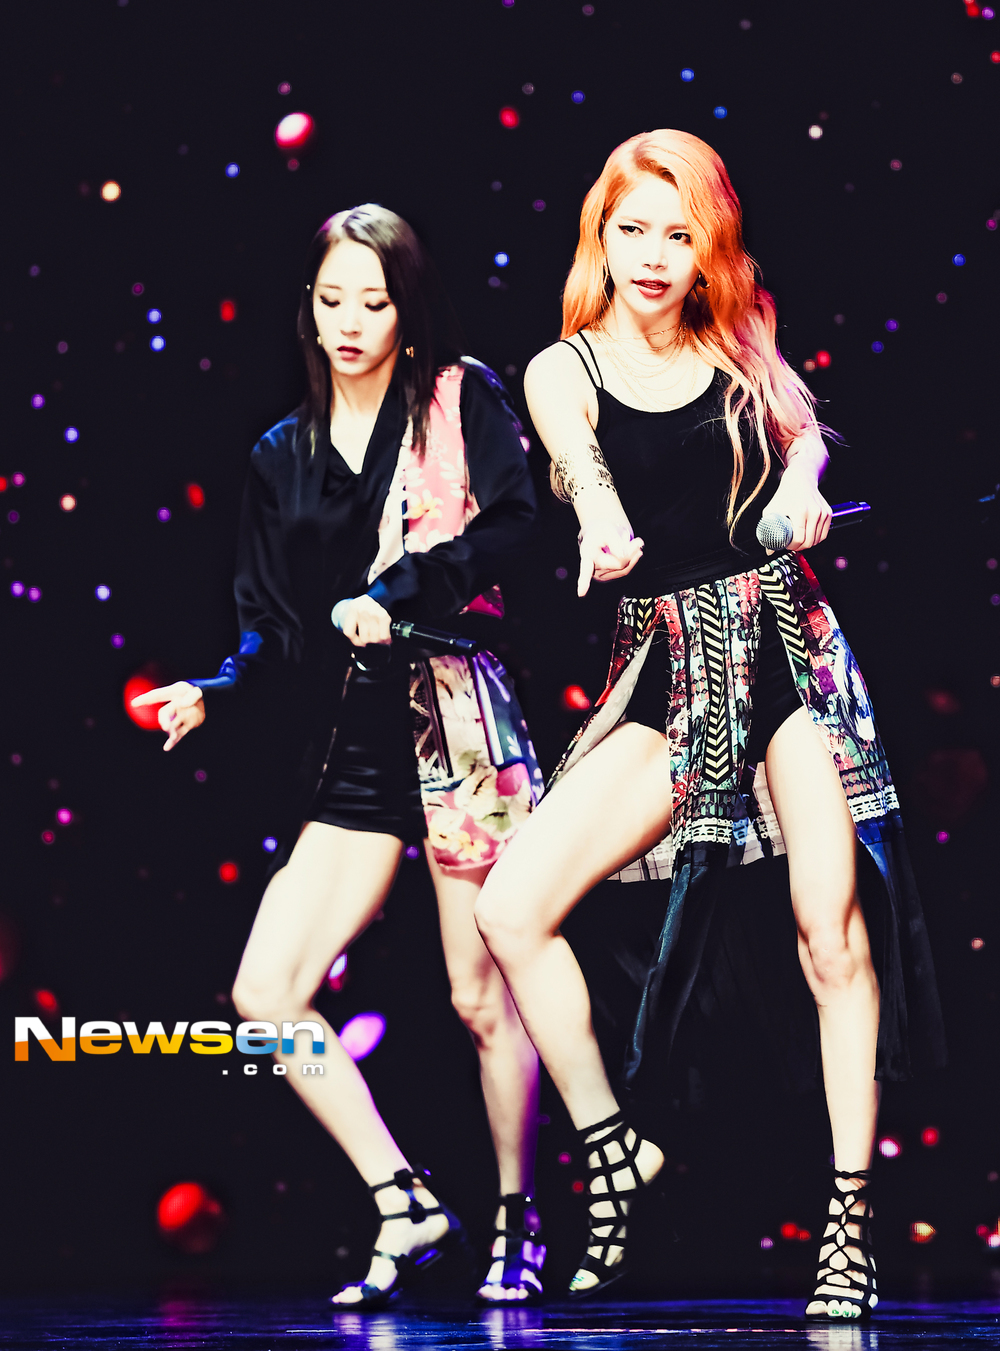 A comeback showcase commemorating the release of the Mini album RED Moon (Sola,Moonbyul, Wheein, Hwasa) was held at YES24 Live Hall in Gwangjin-gu, Seoul on the afternoon of July 16.MAMAMOOs new Mini album RED Moon includes a total of six tracks including the title song You Na Sea of the reggaeton genre first presented by MAMAMOOO, A Summer Nights Dream, The Rainma, Heavenly Sky (Cheongsun), Sleeping Sleep and SELFISH.The title song You and the Year is an impressive song that gives a song to a lover who thinks about himself and thinks about himself and takes care of himself first, unlike himself who thinks about the other person first.Lee Jae-ha